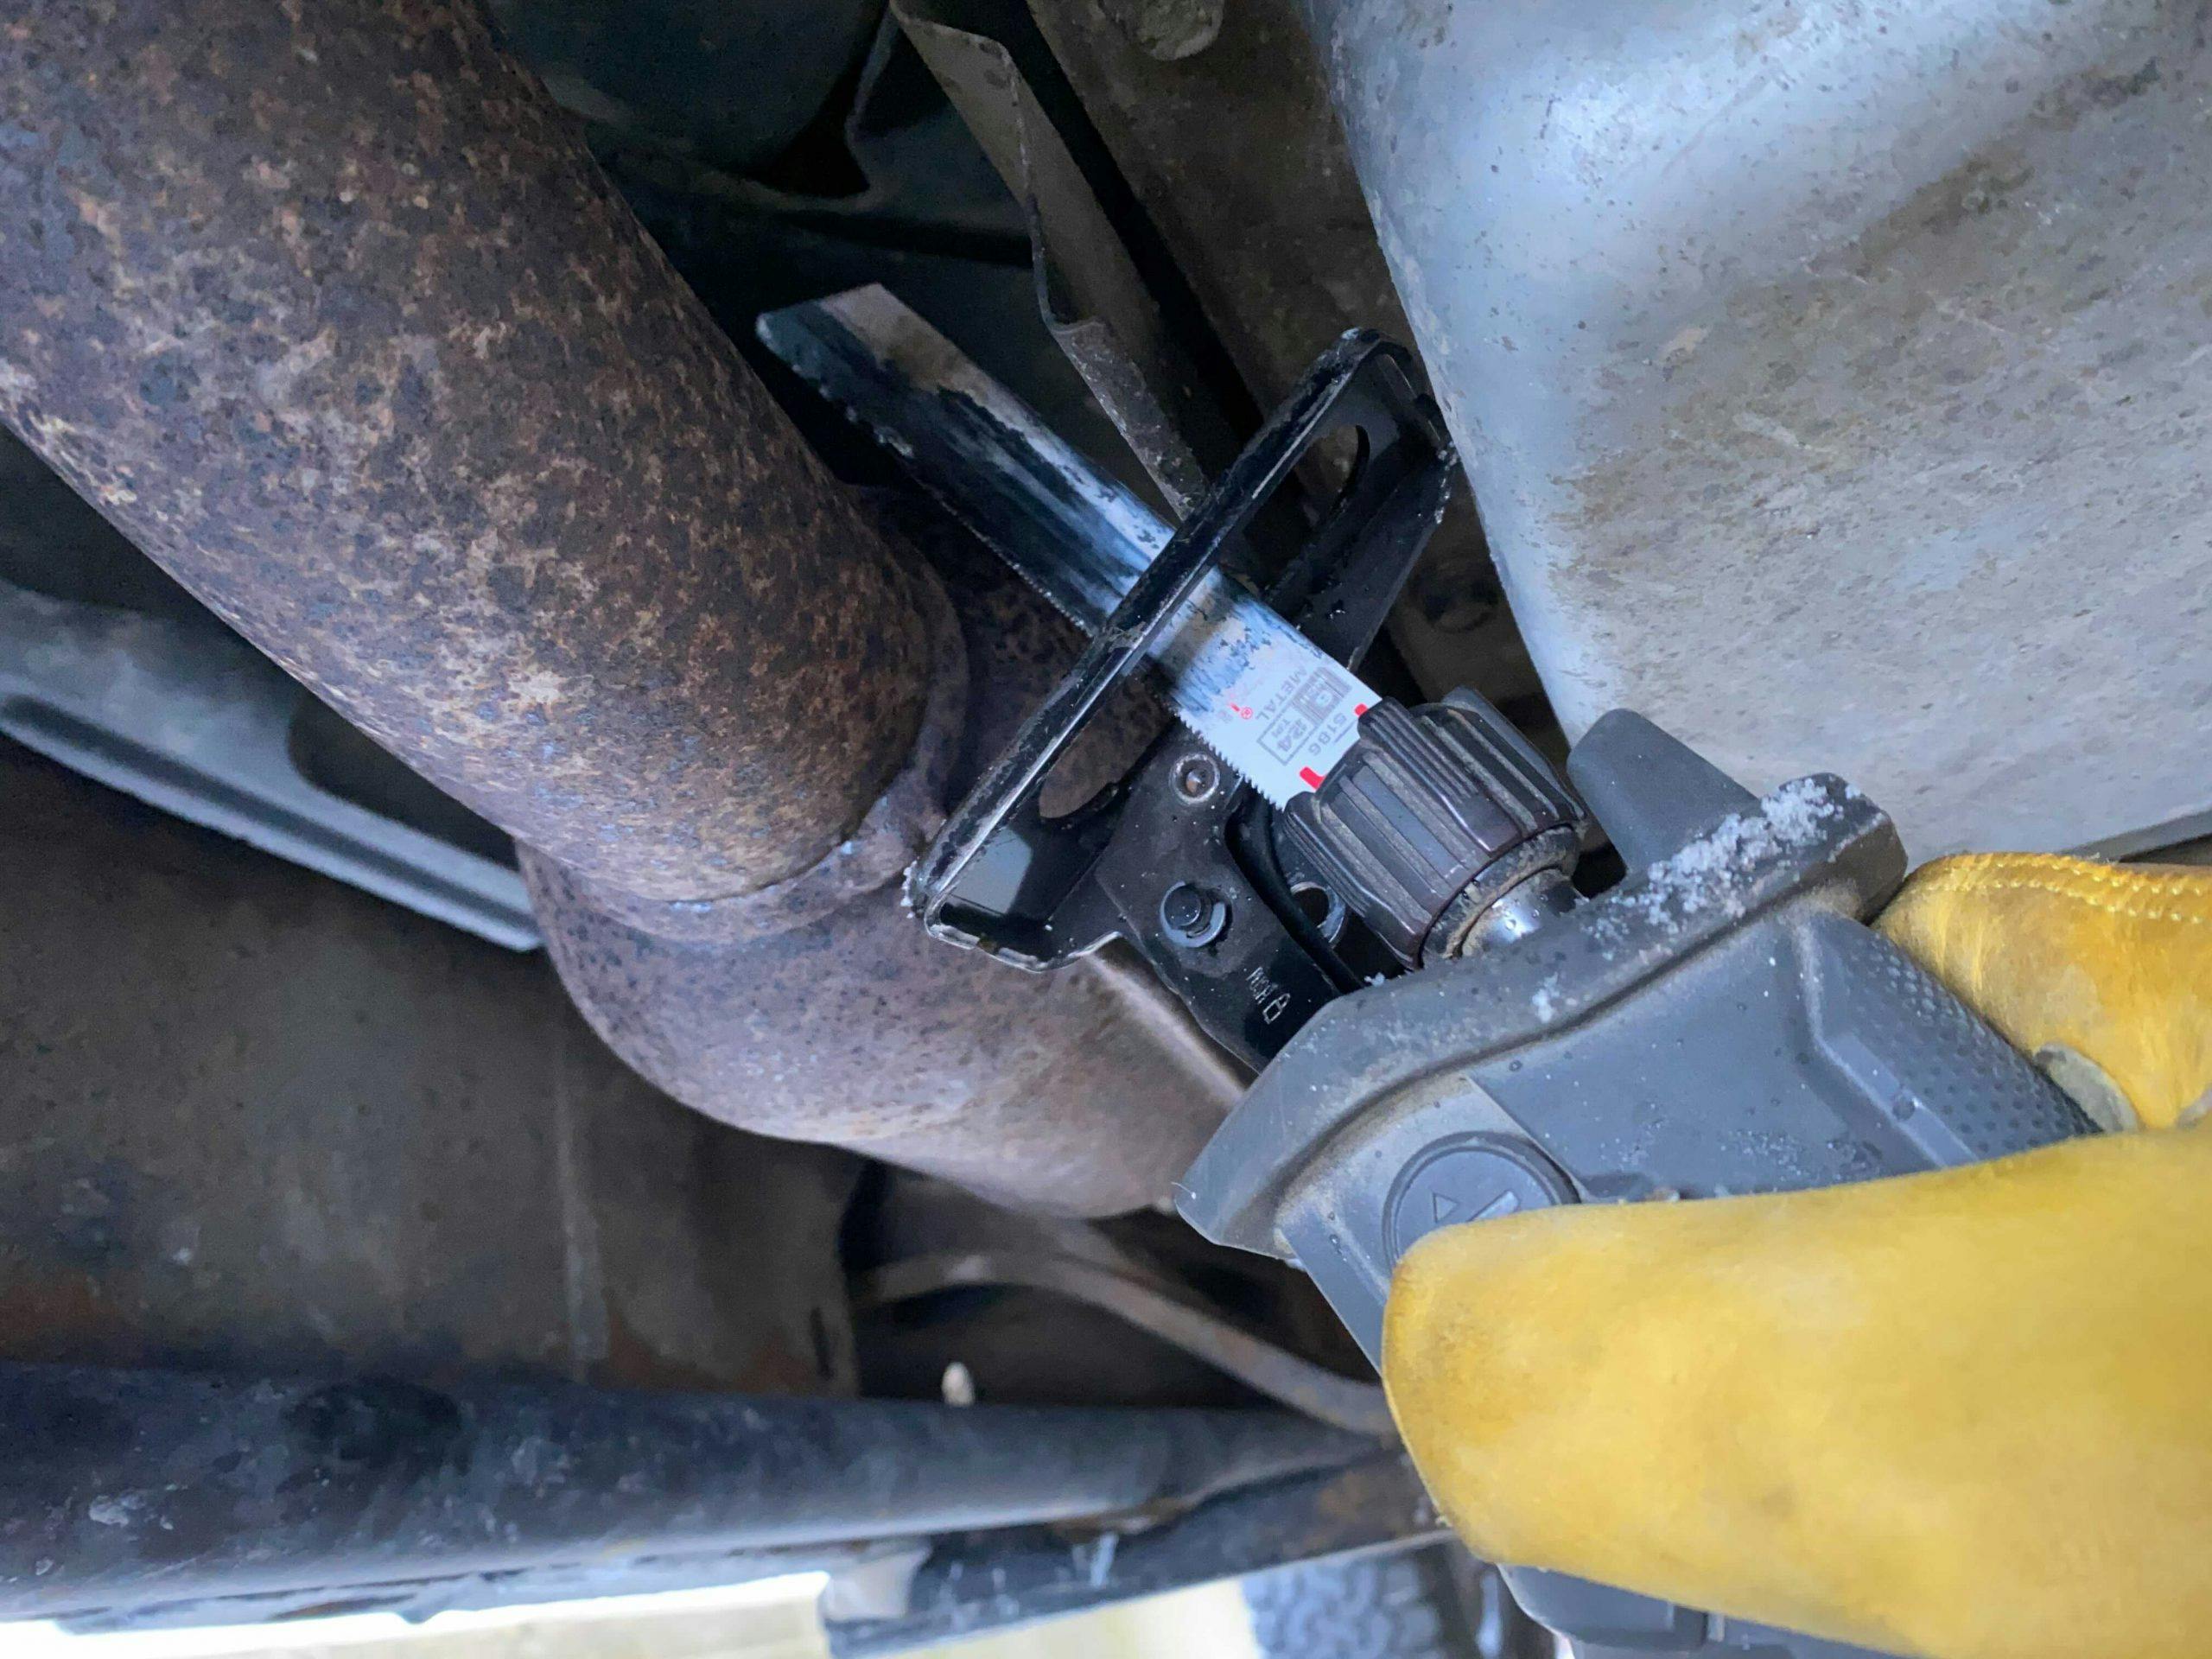 With Precious Metals In Demand Brazen Thieves Are Stealing Catalytic Converters Hagerty Media